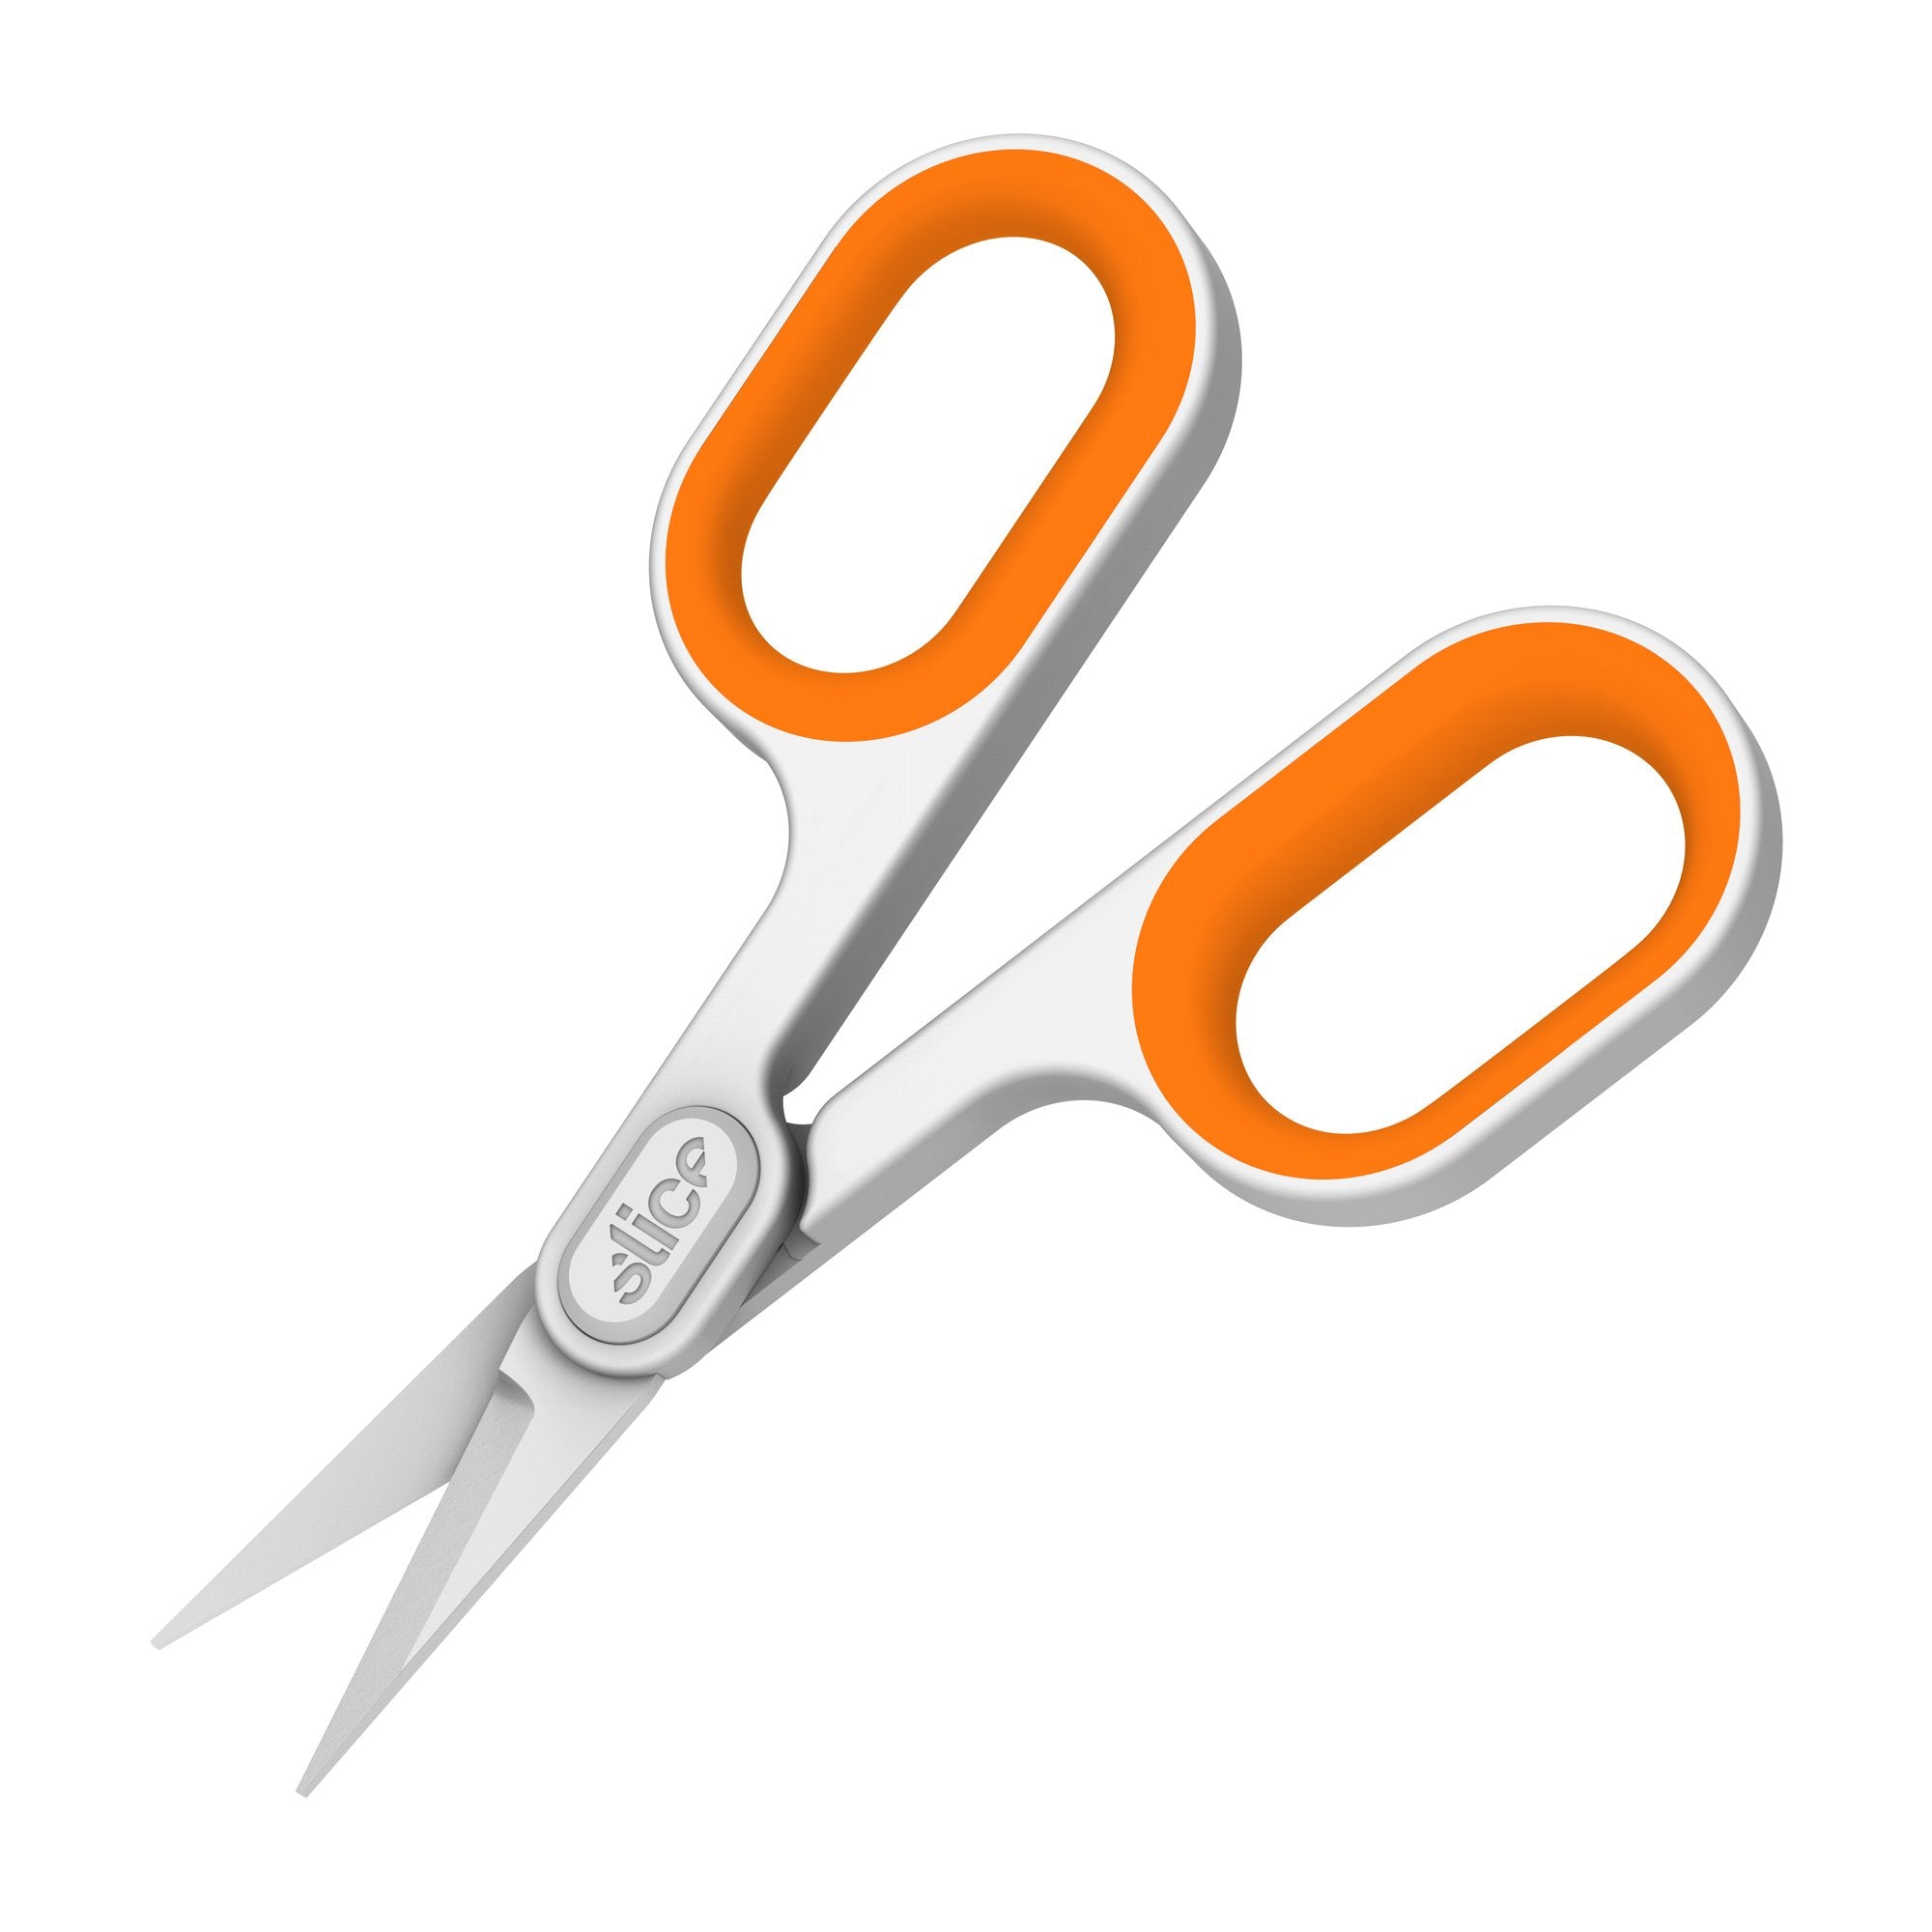 User-friendly And Safely Baby Food Cutting Scissors - Buy User-friendly And  Safely Baby Food Cutting Scissors Product on